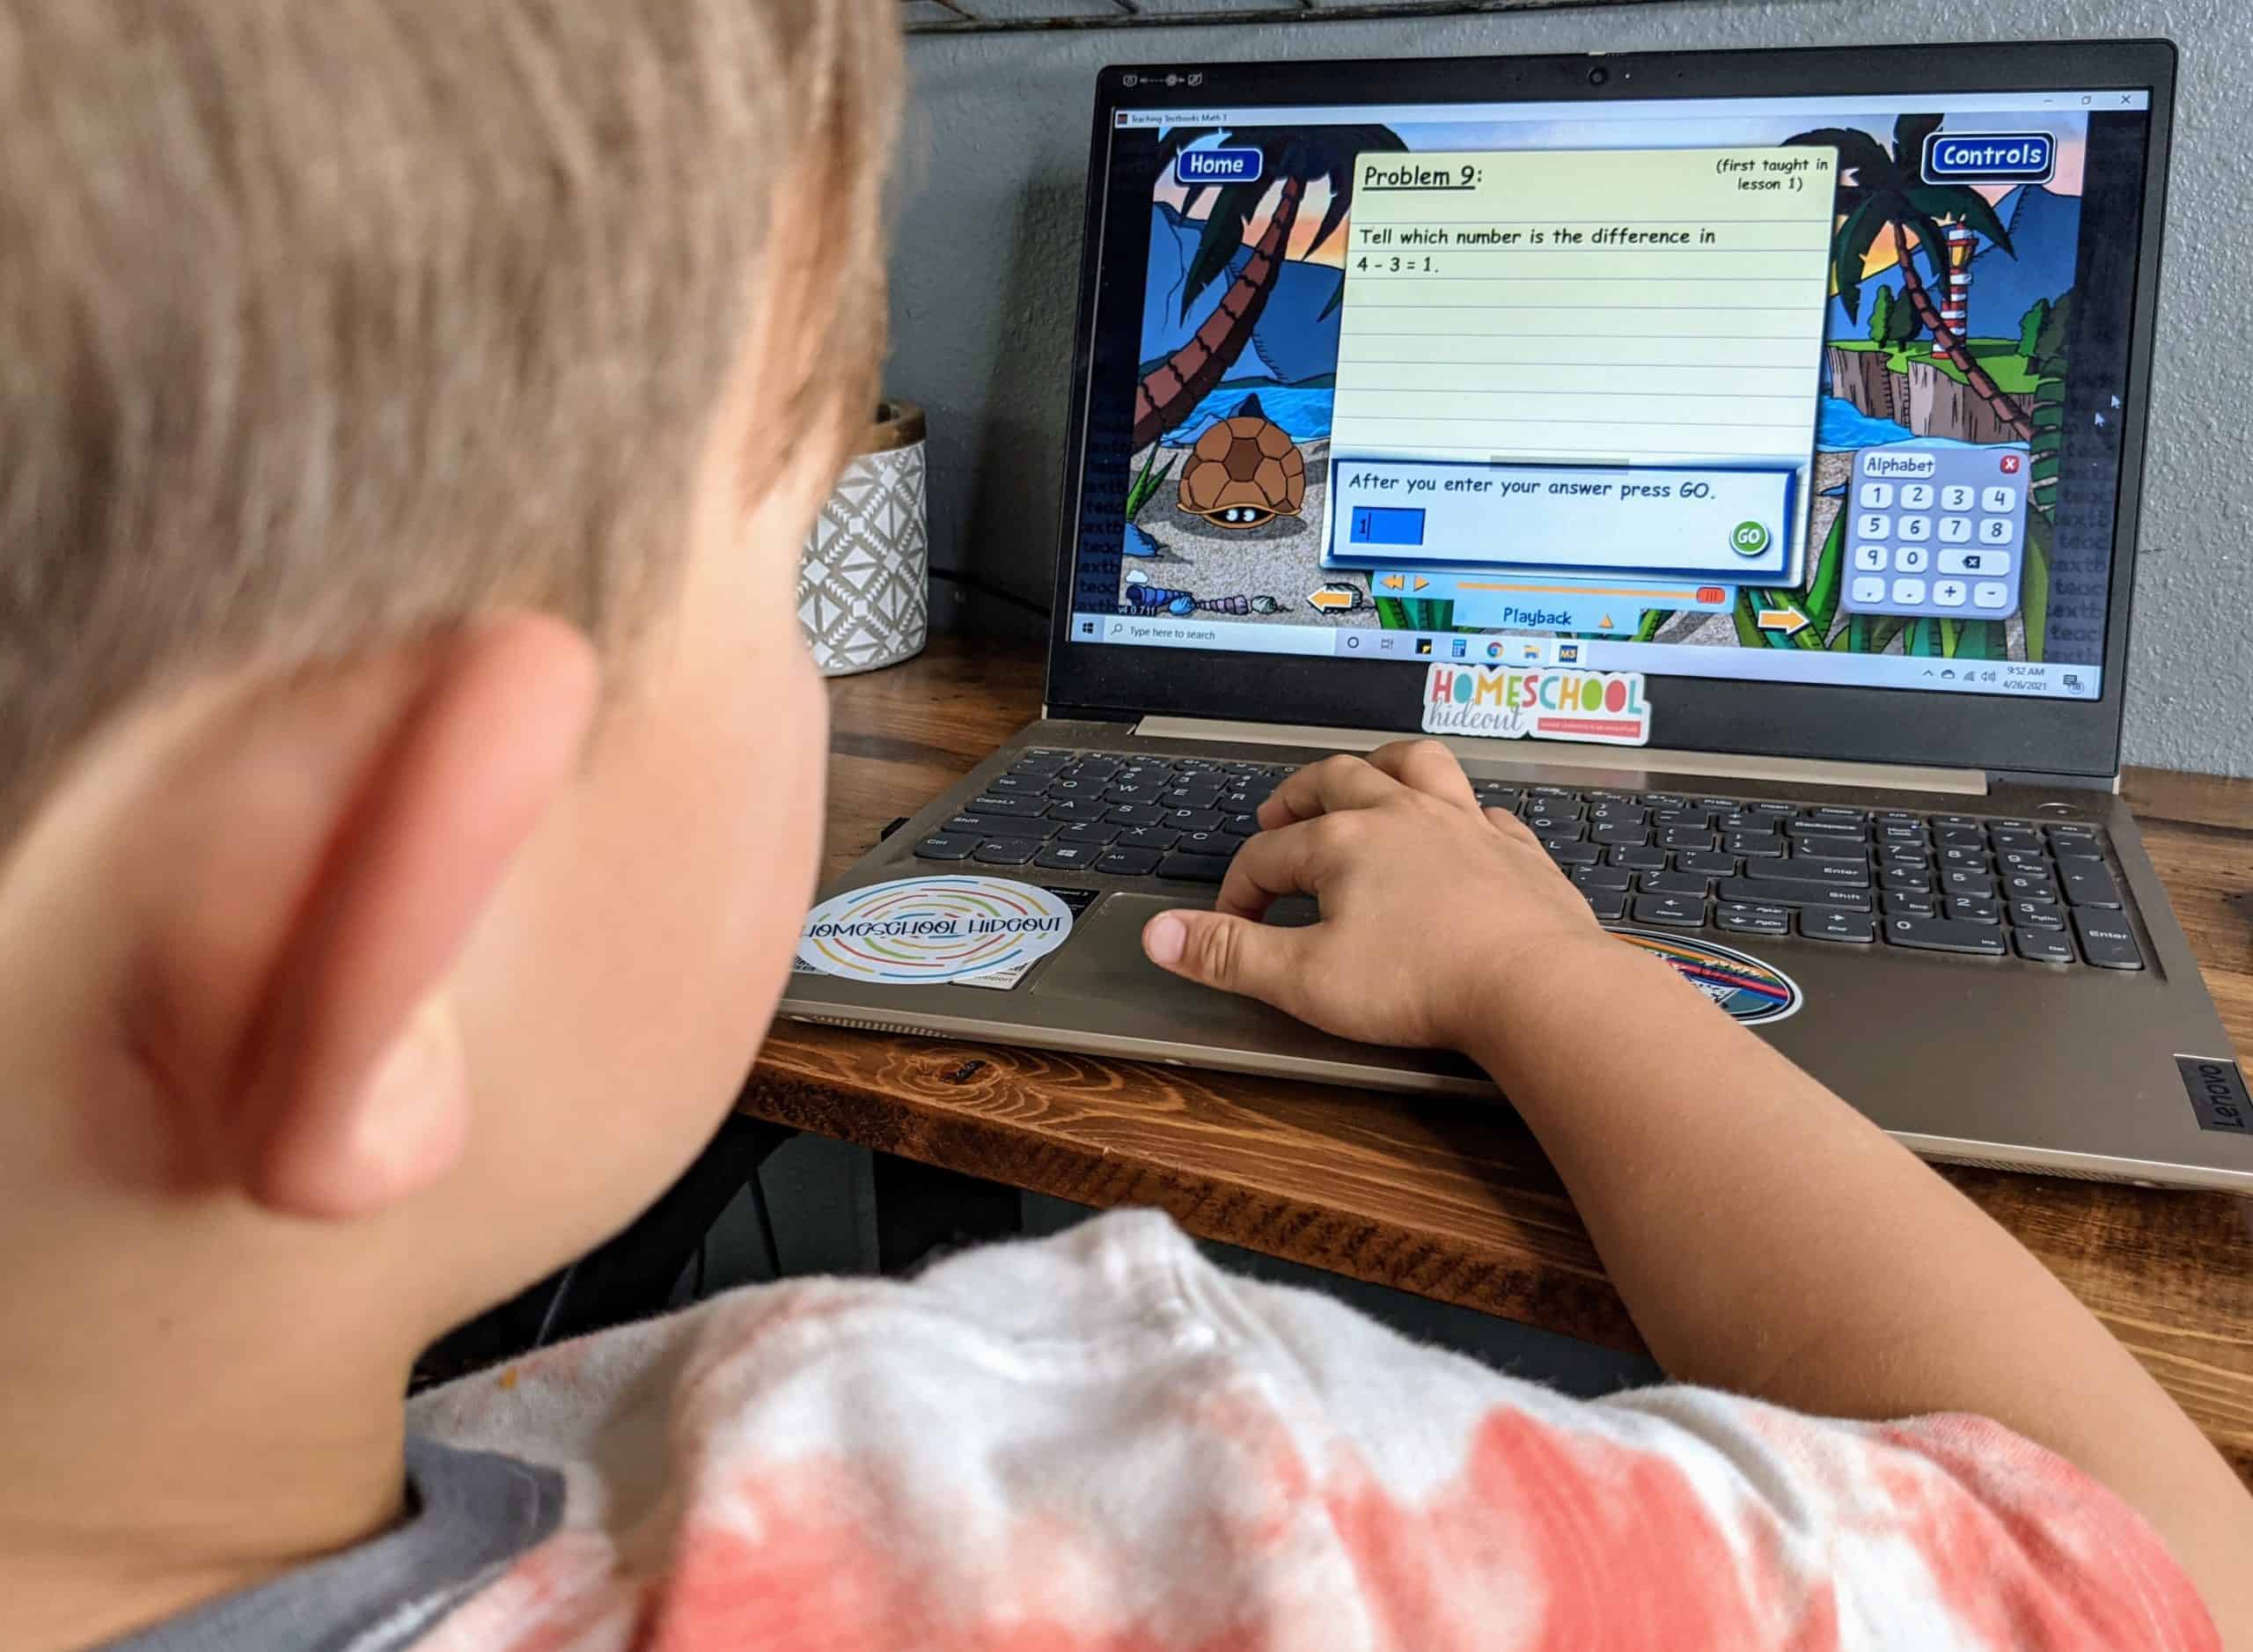 Teaching Textbooks 4.0 is more than I ever expected! Holy cow! It teaches, grades AND records our homeschool math, all while making the kids ENJOY math!